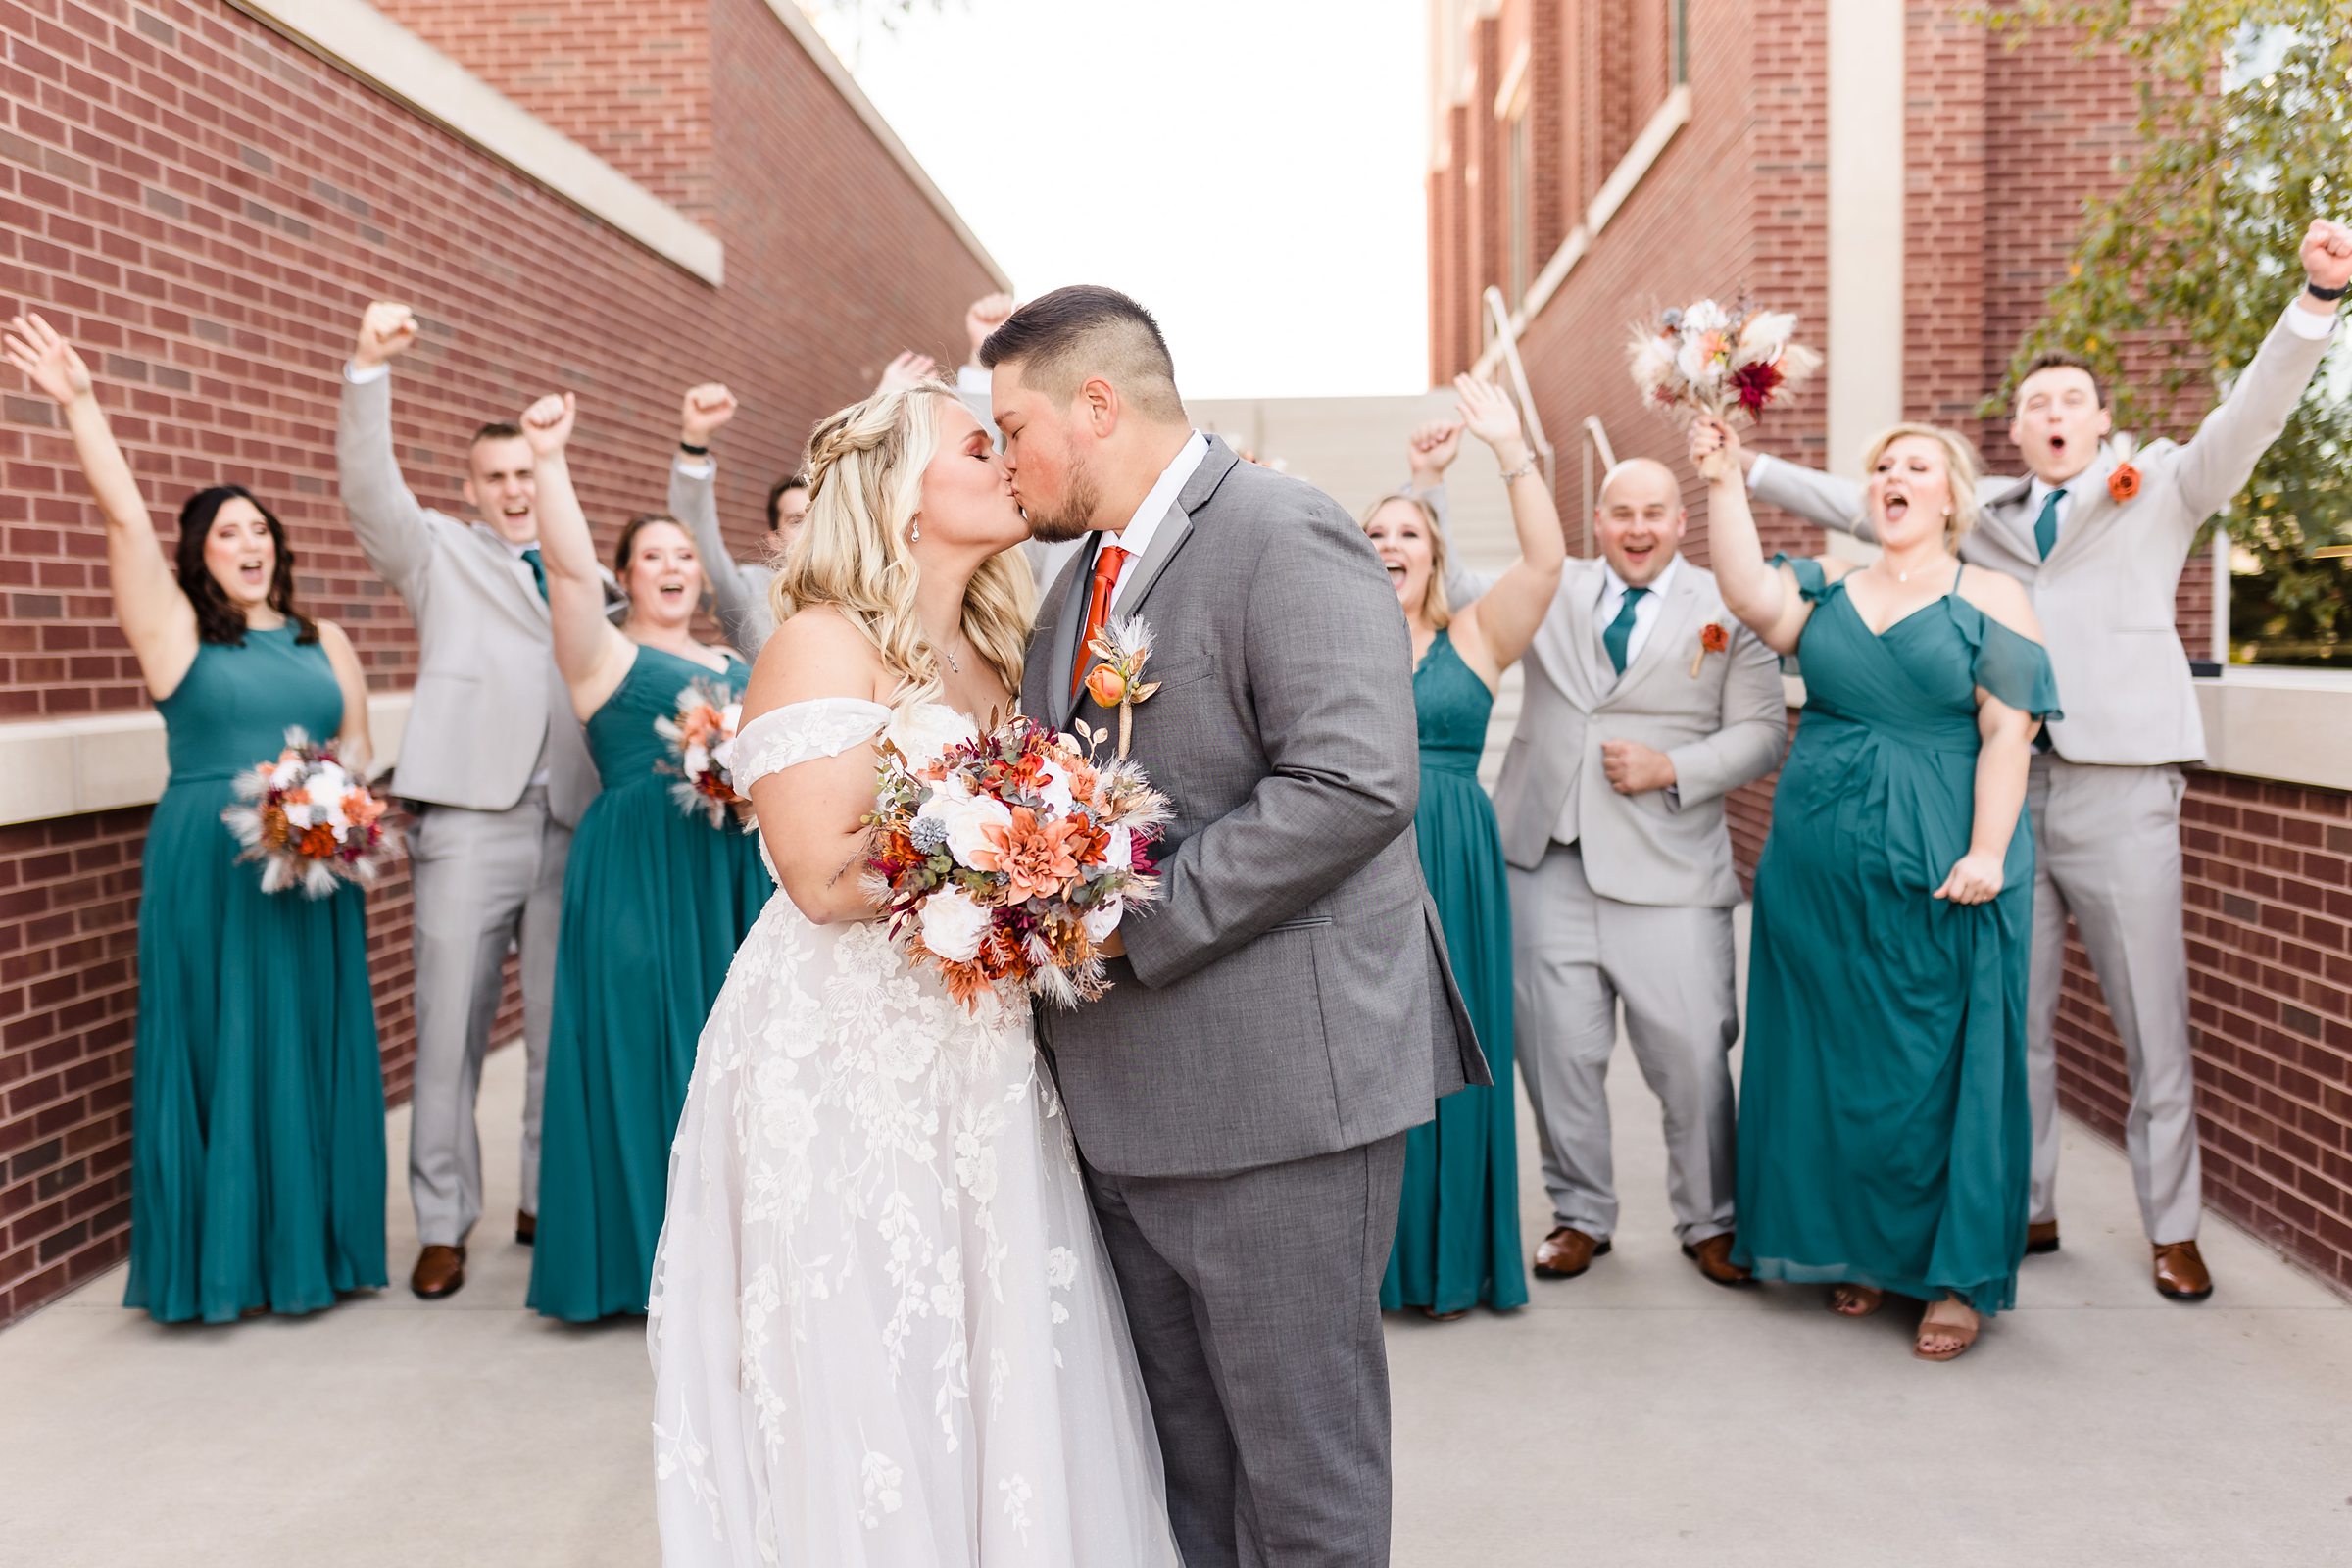 Bridal Party celebrate before a wedding at the Destihl Brewery in Normal, Illinois.